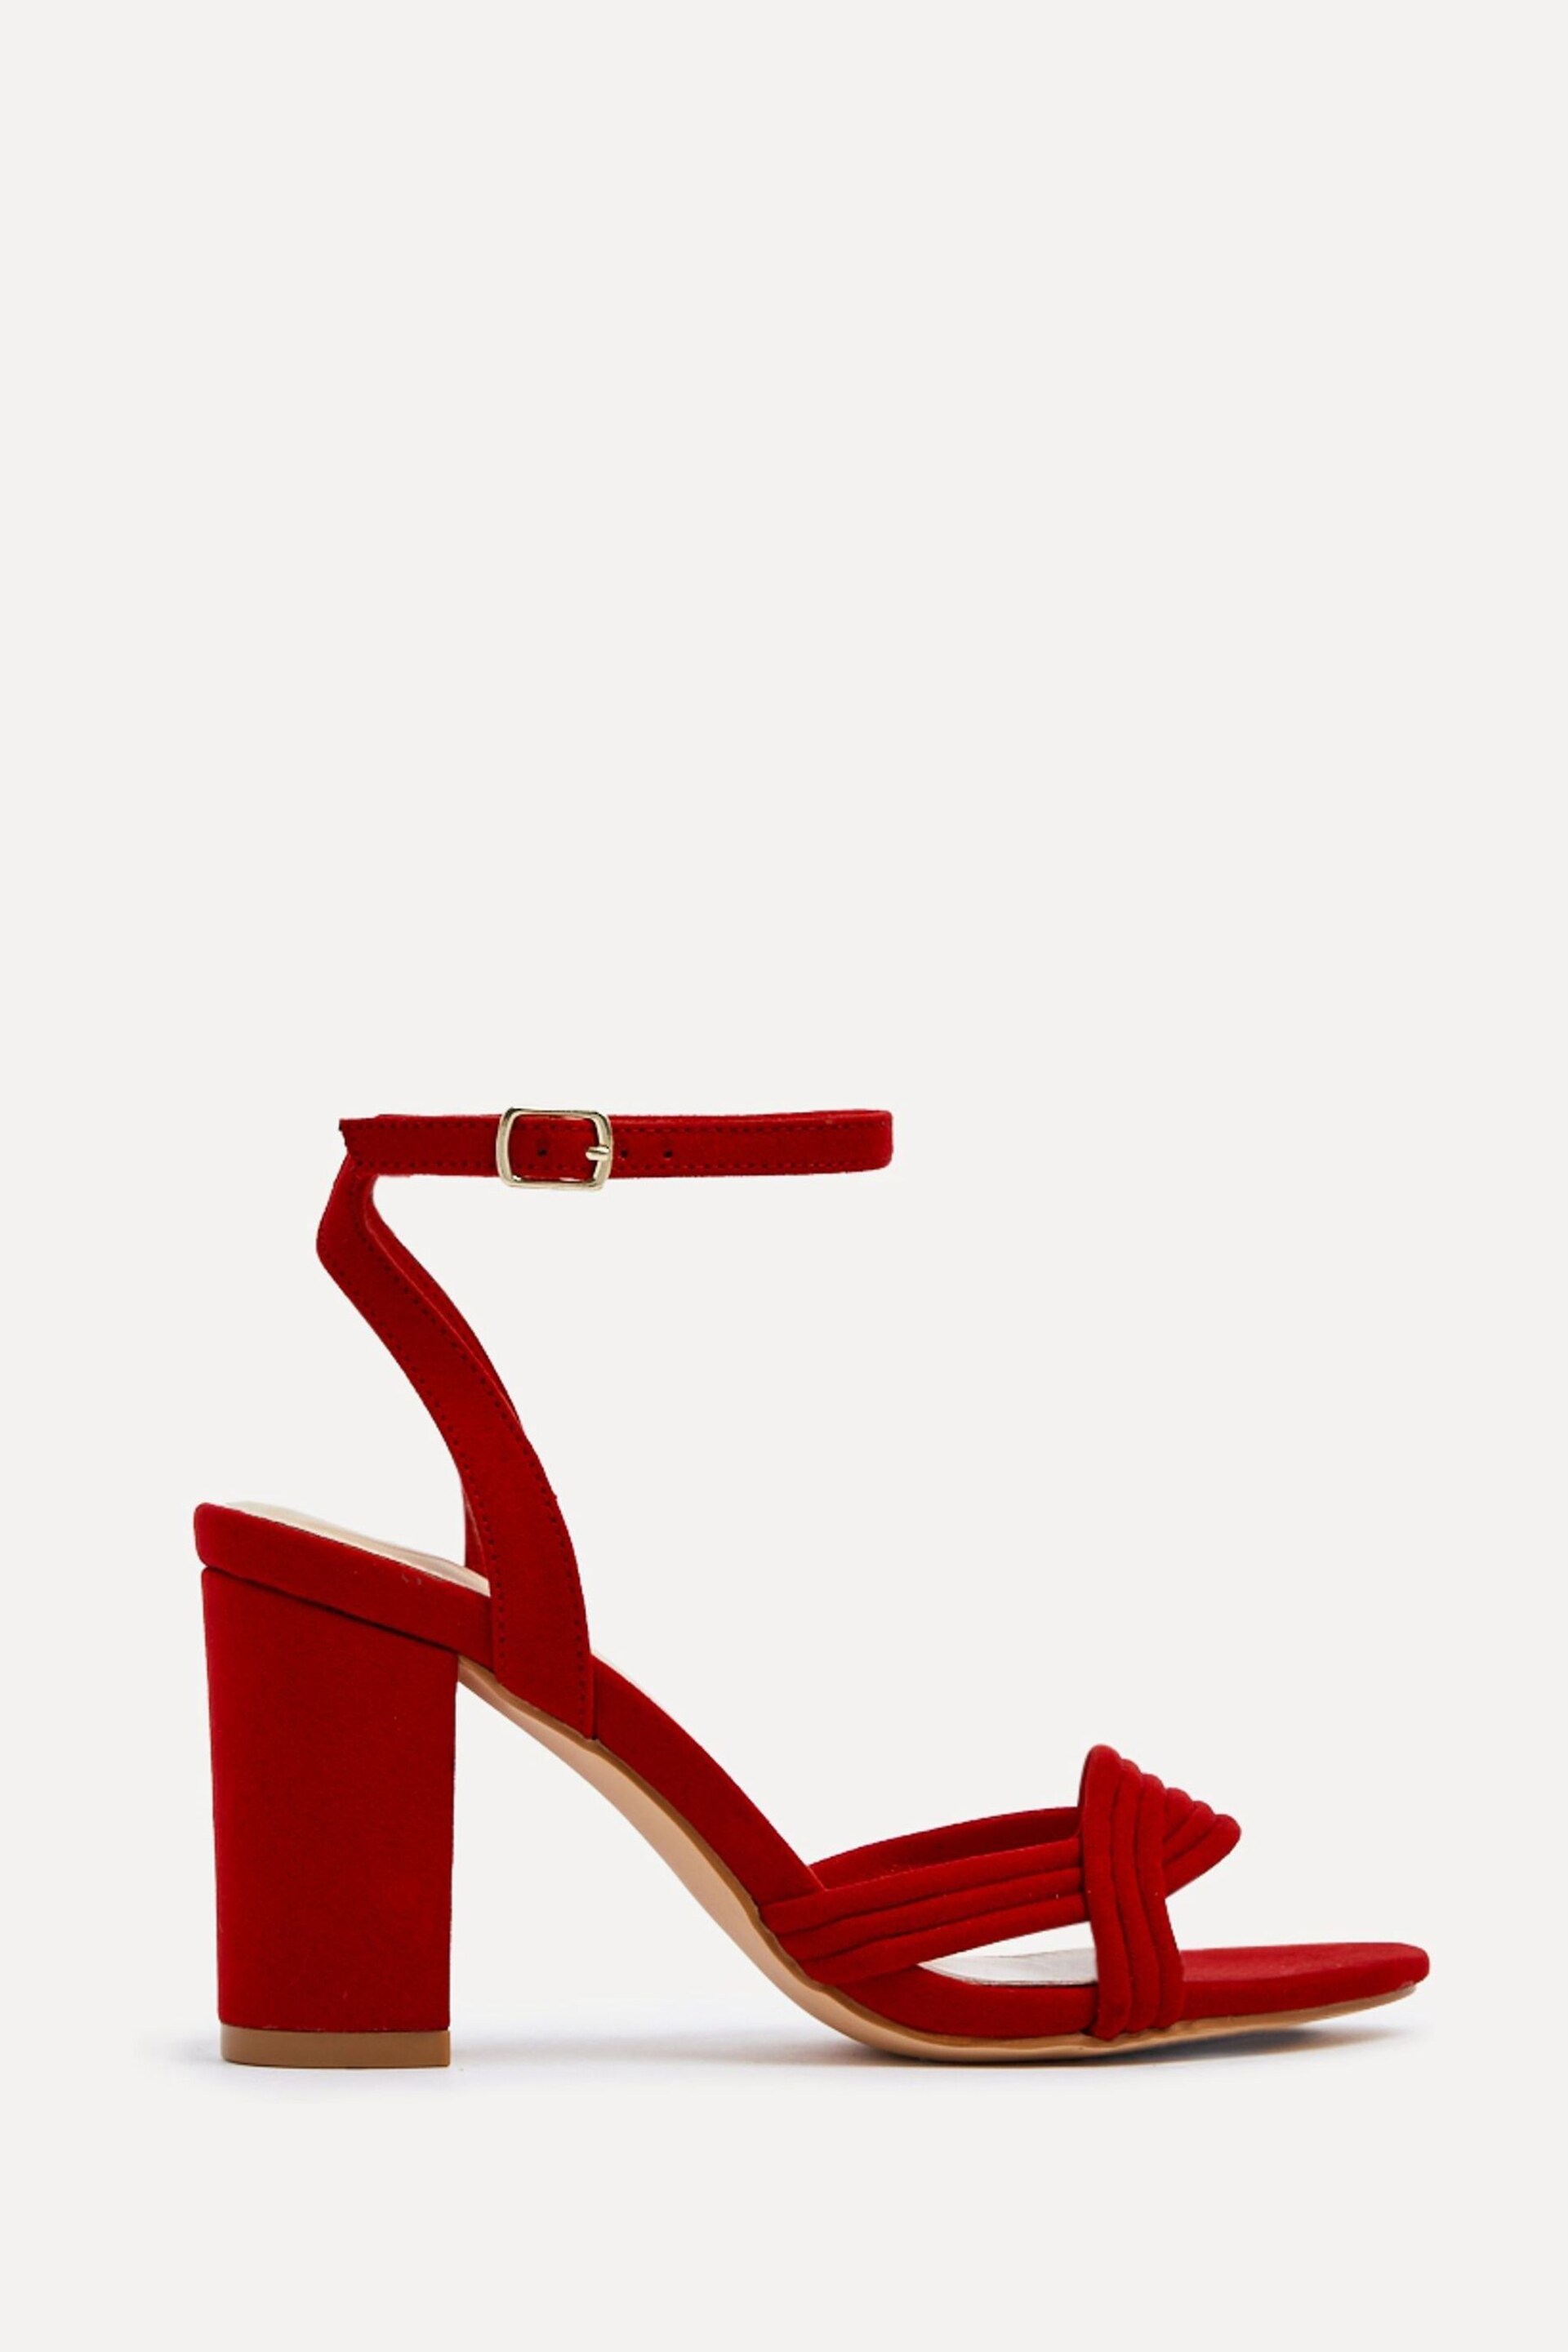 Linzi Red Regina Block Heeled Sandals With Intertwined Front Straps - Image 2 of 5